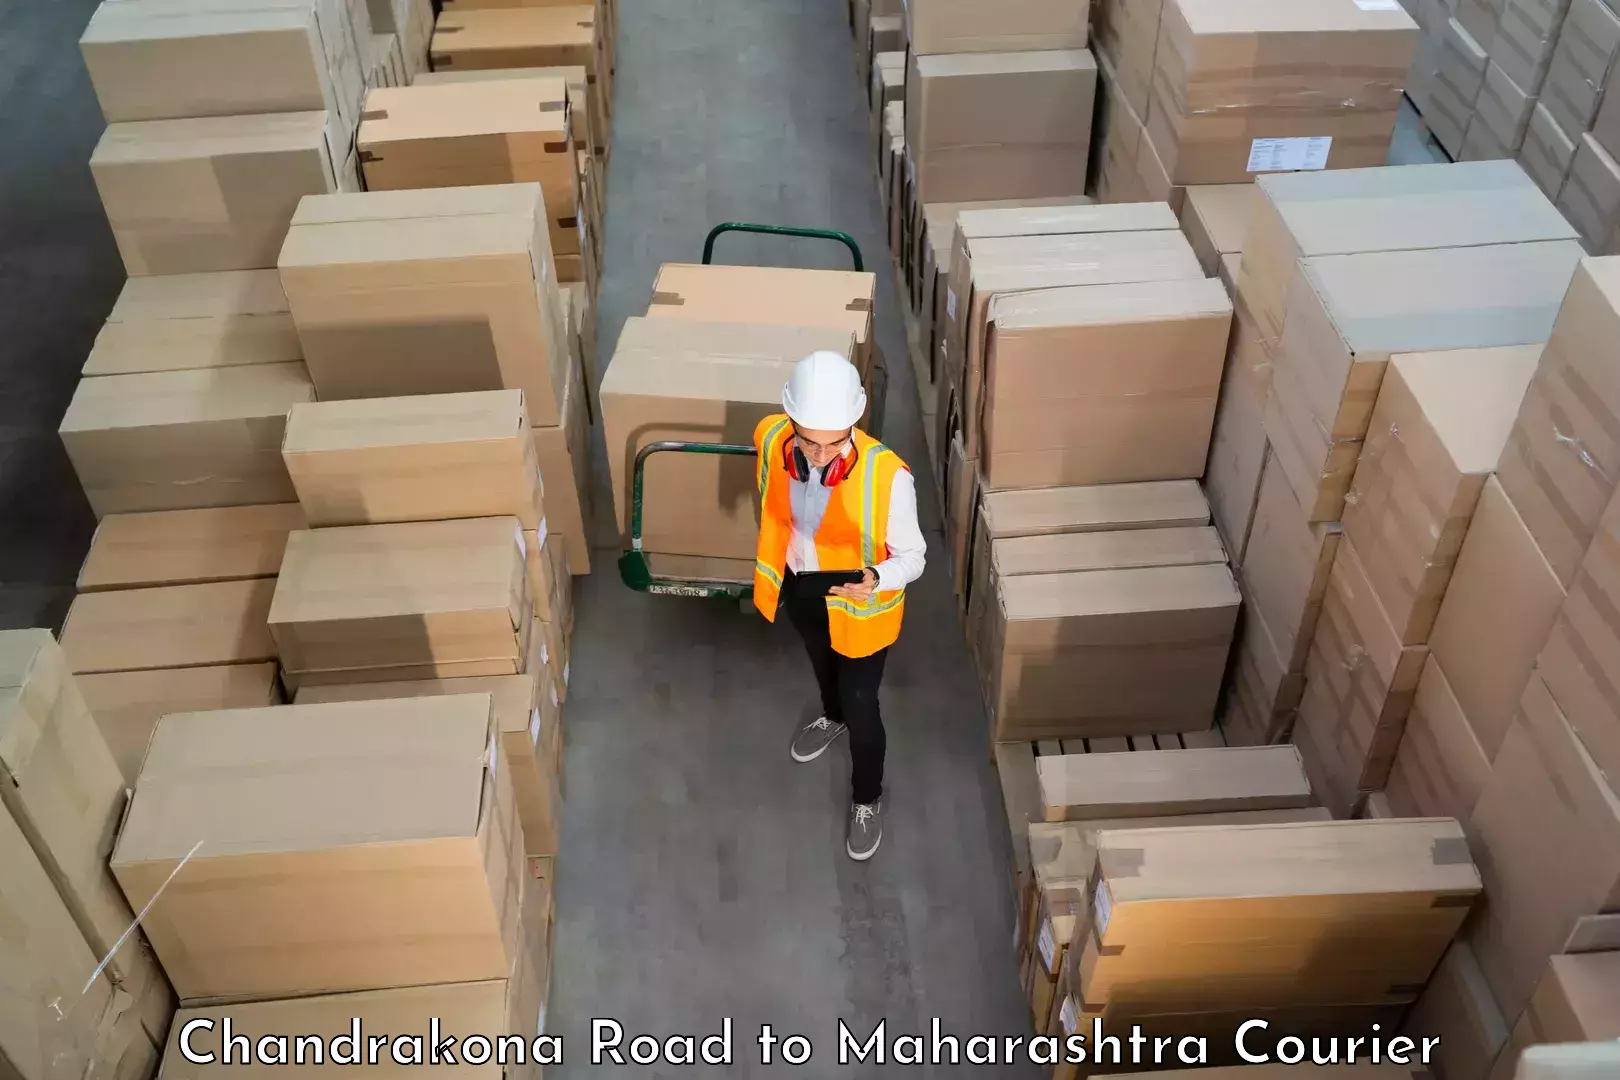 Moving and storage services Chandrakona Road to Symbiosis International Pune